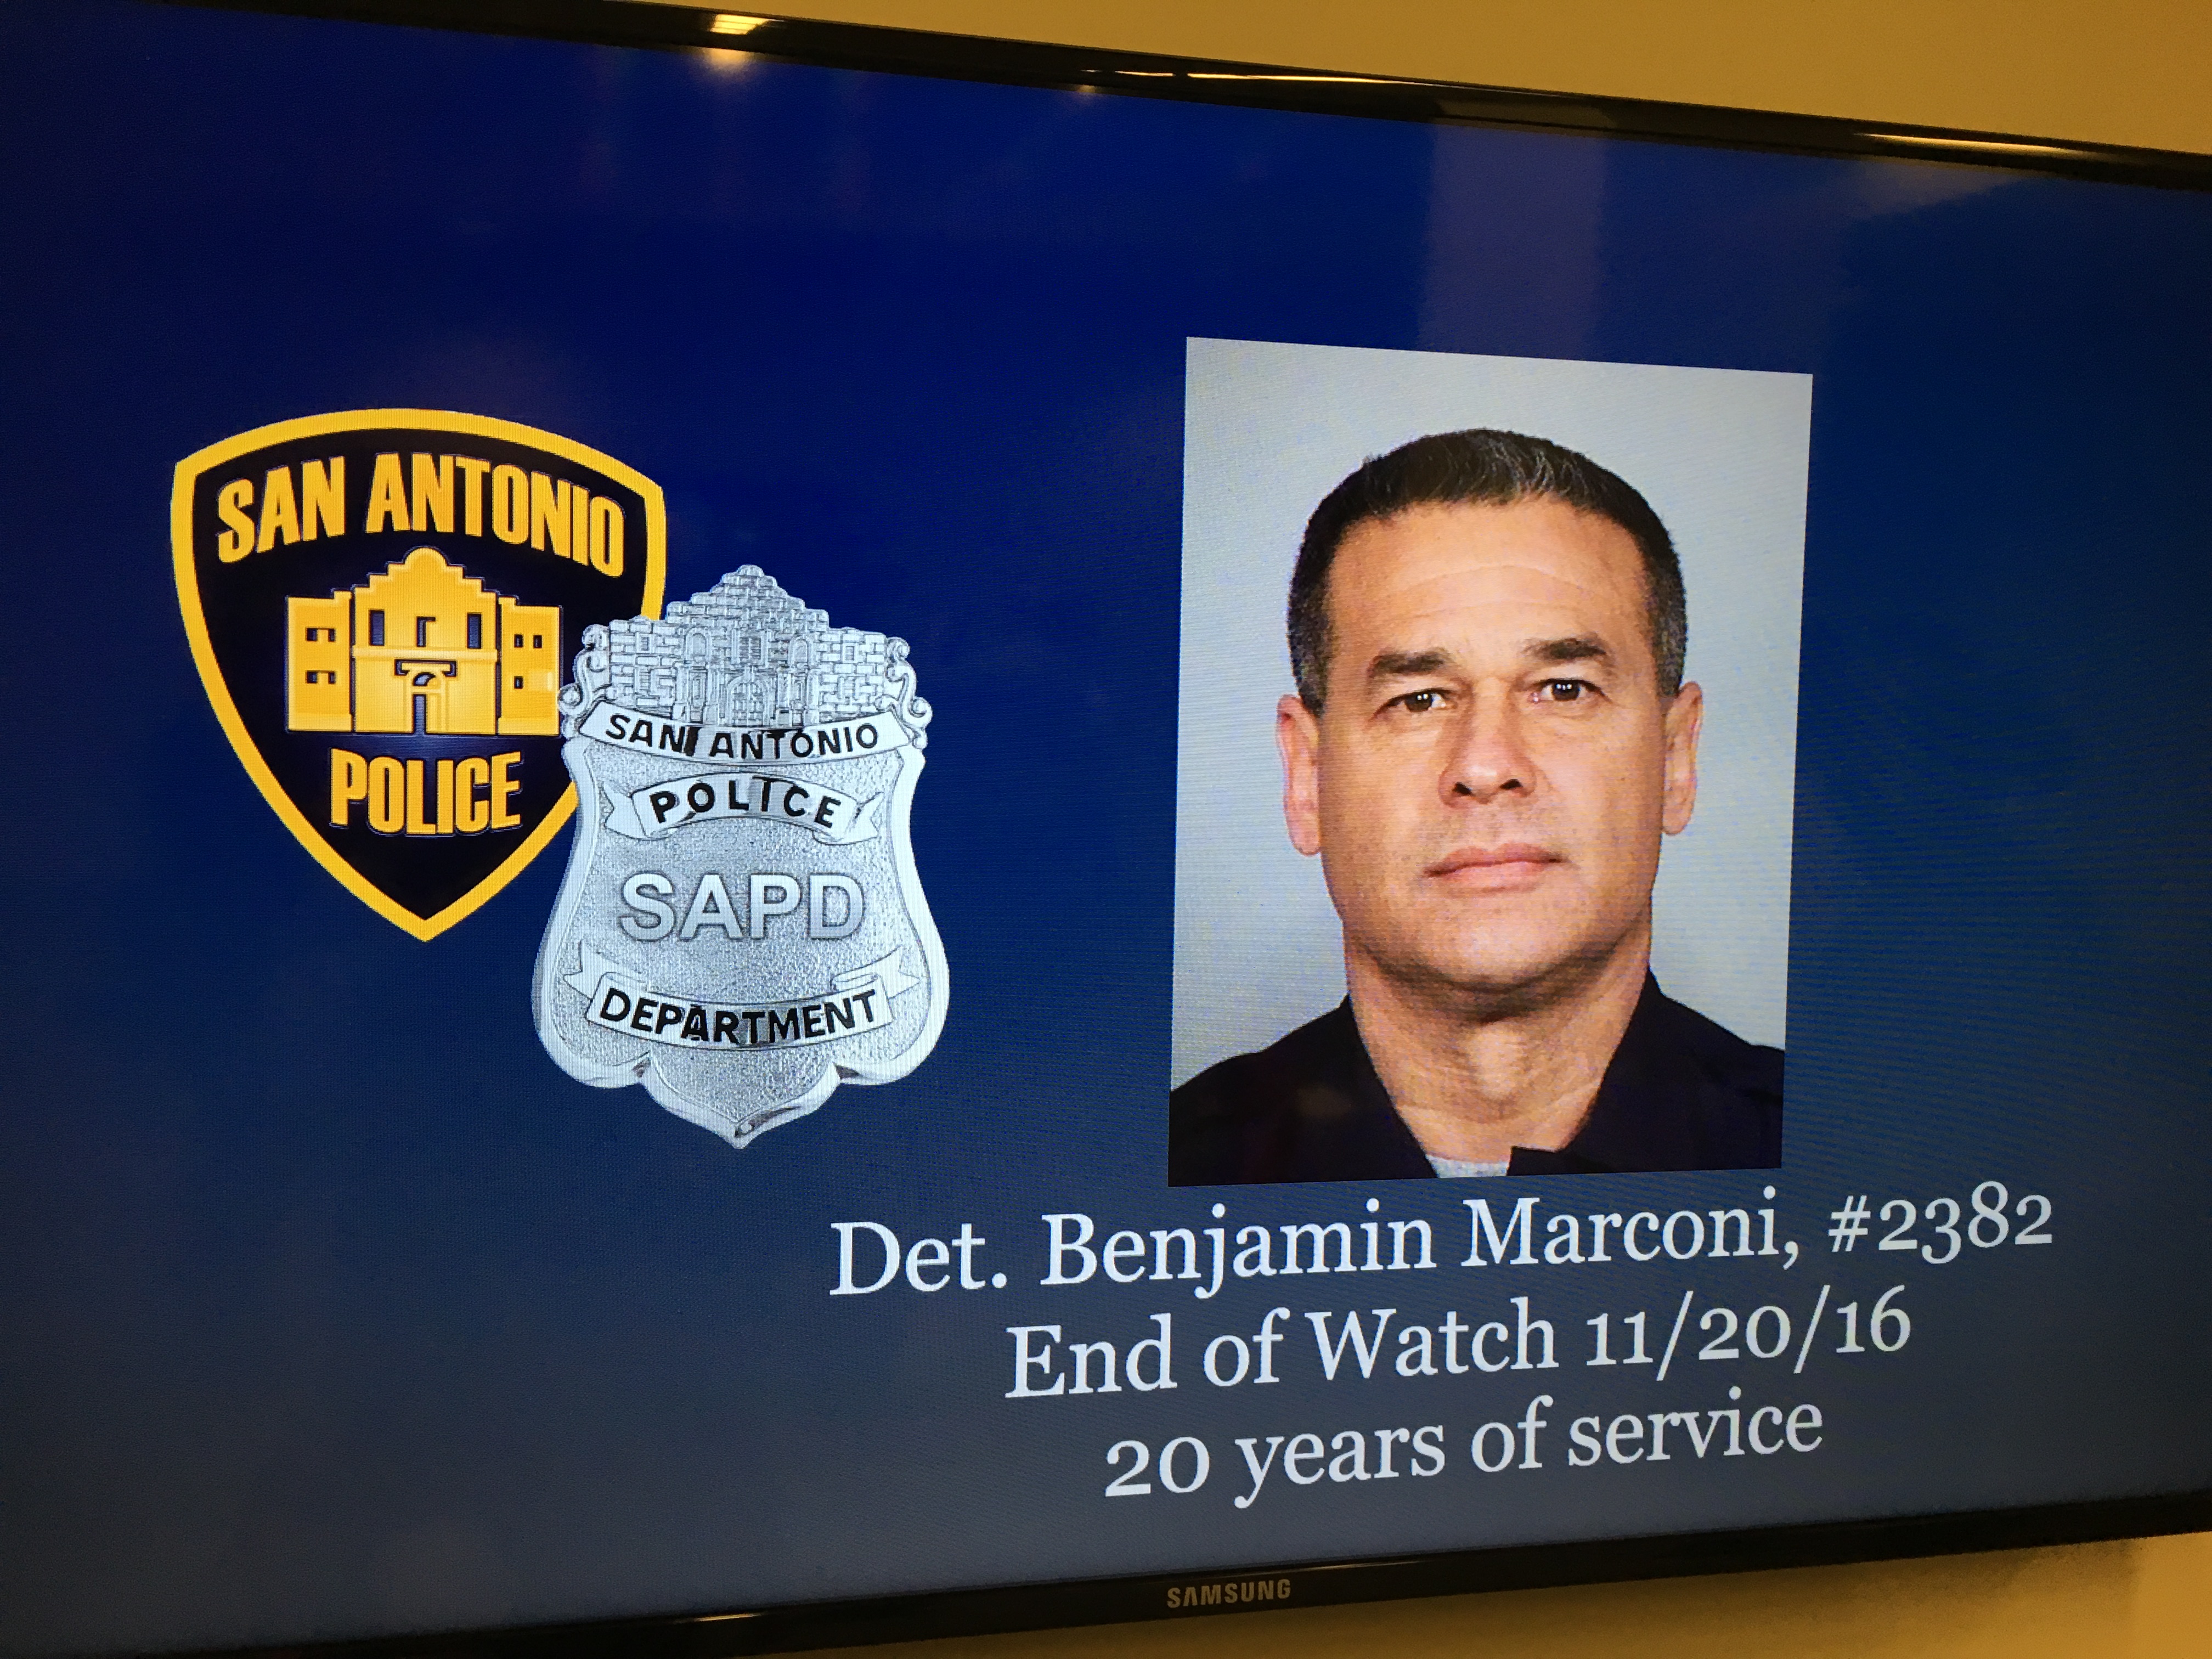 Police have identified 20-year veteran Det. Benjamin Marconi as the officer fatally shot by a gunman Sunday. 